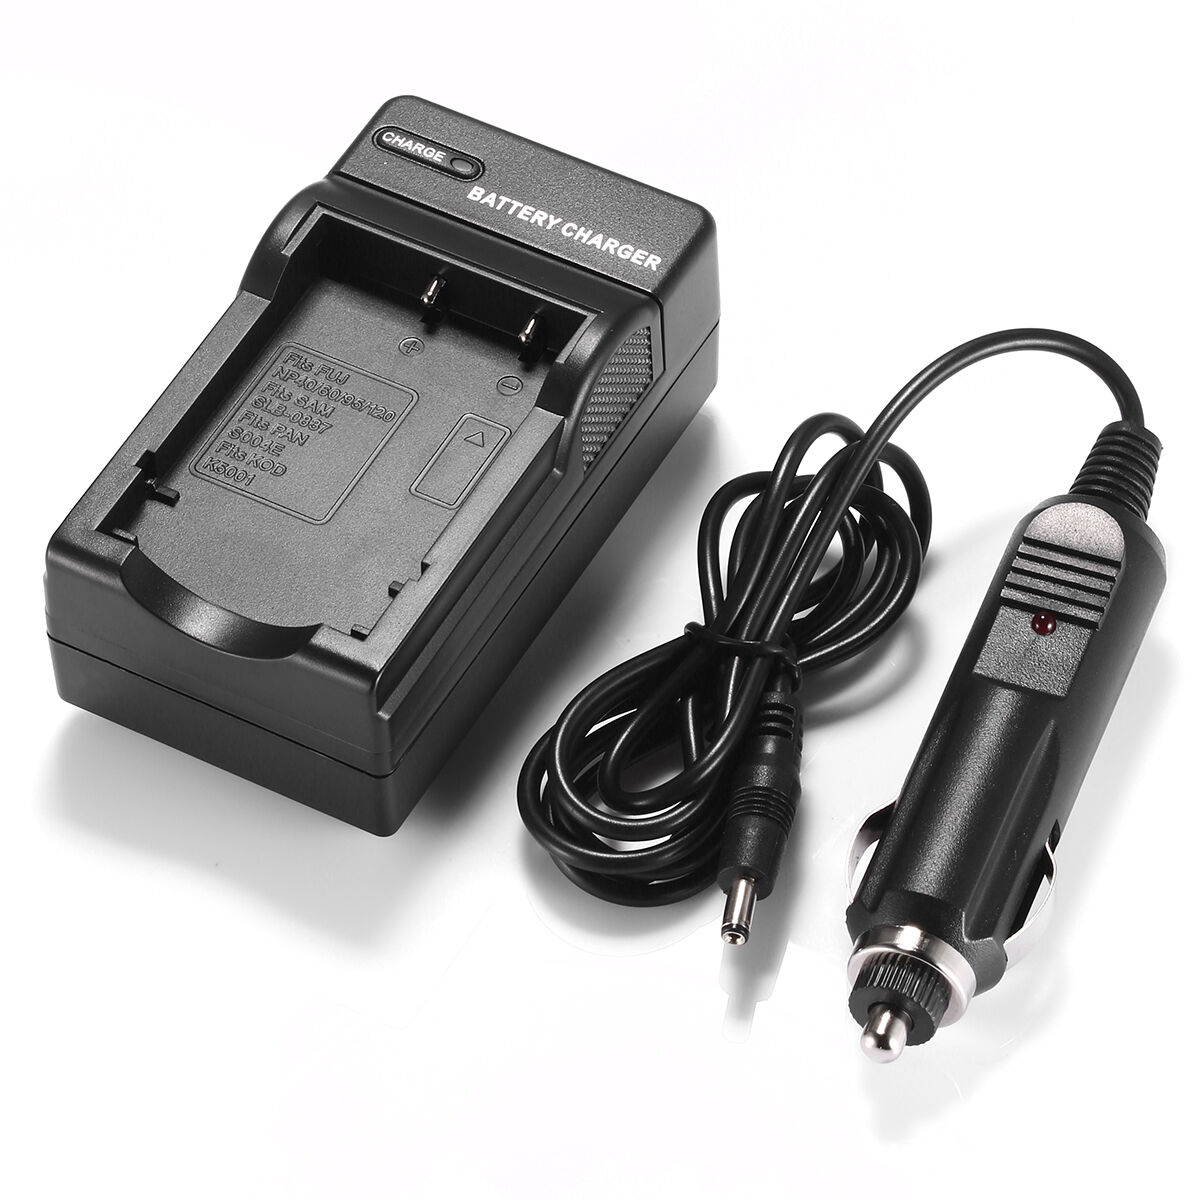 CASIO Exilim Pro EX-F1 battery charger